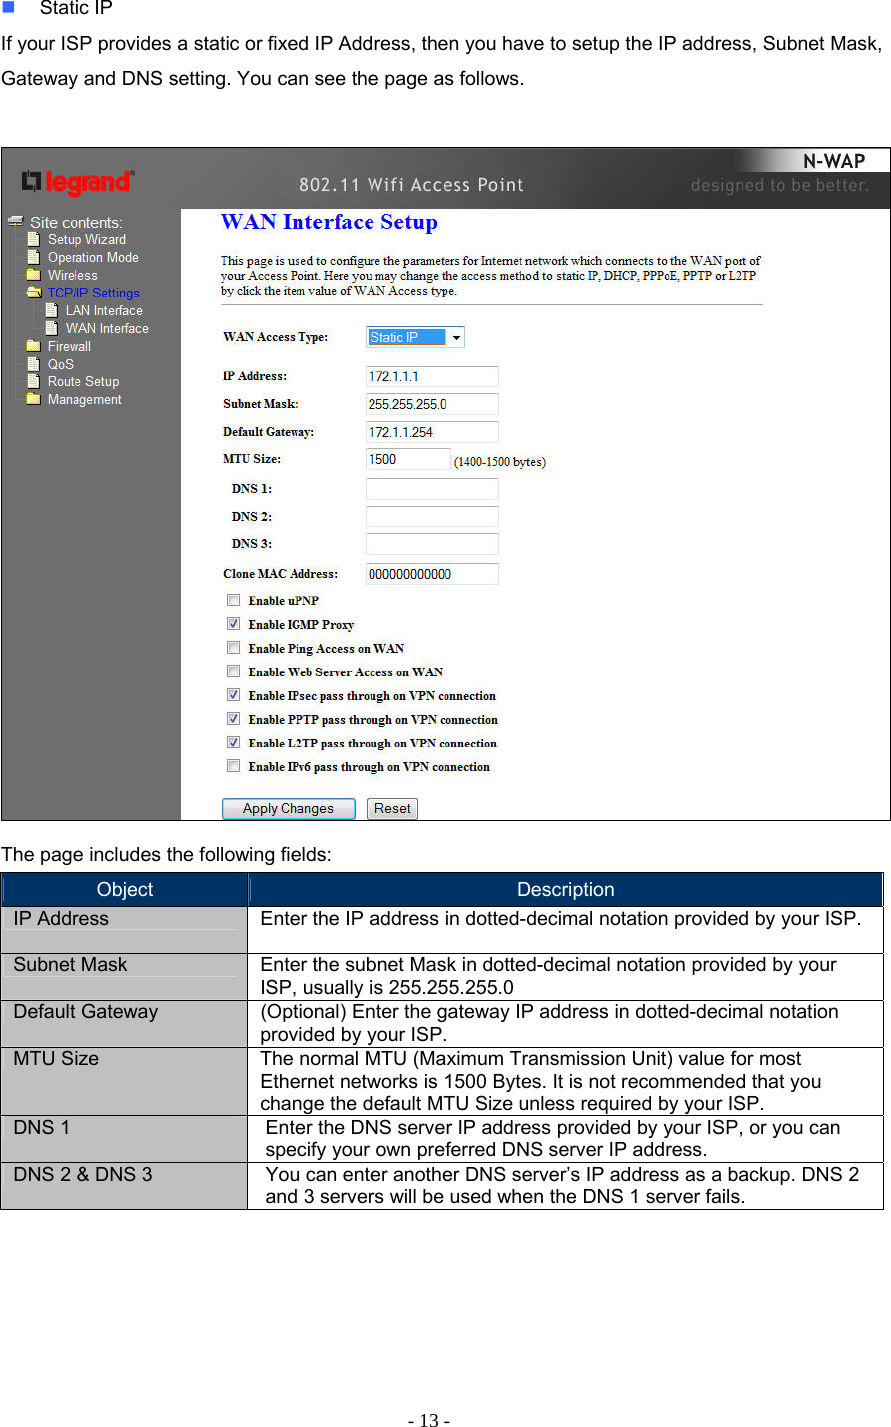 - 13 -  Static IP If your ISP provides a static or fixed IP Address, then you have to setup the IP address, Subnet Mask, Gateway and DNS setting. You can see the page as follows.   The page includes the following fields: Object  Description IP Address   Enter the IP address in dotted-decimal notation provided by your ISP. Subnet Mask  Enter the subnet Mask in dotted-decimal notation provided by your ISP, usually is 255.255.255.0 Default Gateway  (Optional) Enter the gateway IP address in dotted-decimal notation provided by your ISP. MTU Size  The normal MTU (Maximum Transmission Unit) value for most Ethernet networks is 1500 Bytes. It is not recommended that you change the default MTU Size unless required by your ISP. DNS 1  Enter the DNS server IP address provided by your ISP, or you can specify your own preferred DNS server IP address.  DNS 2 &amp; DNS 3  You can enter another DNS server’s IP address as a backup. DNS 2 and 3 servers will be used when the DNS 1 server fails.       